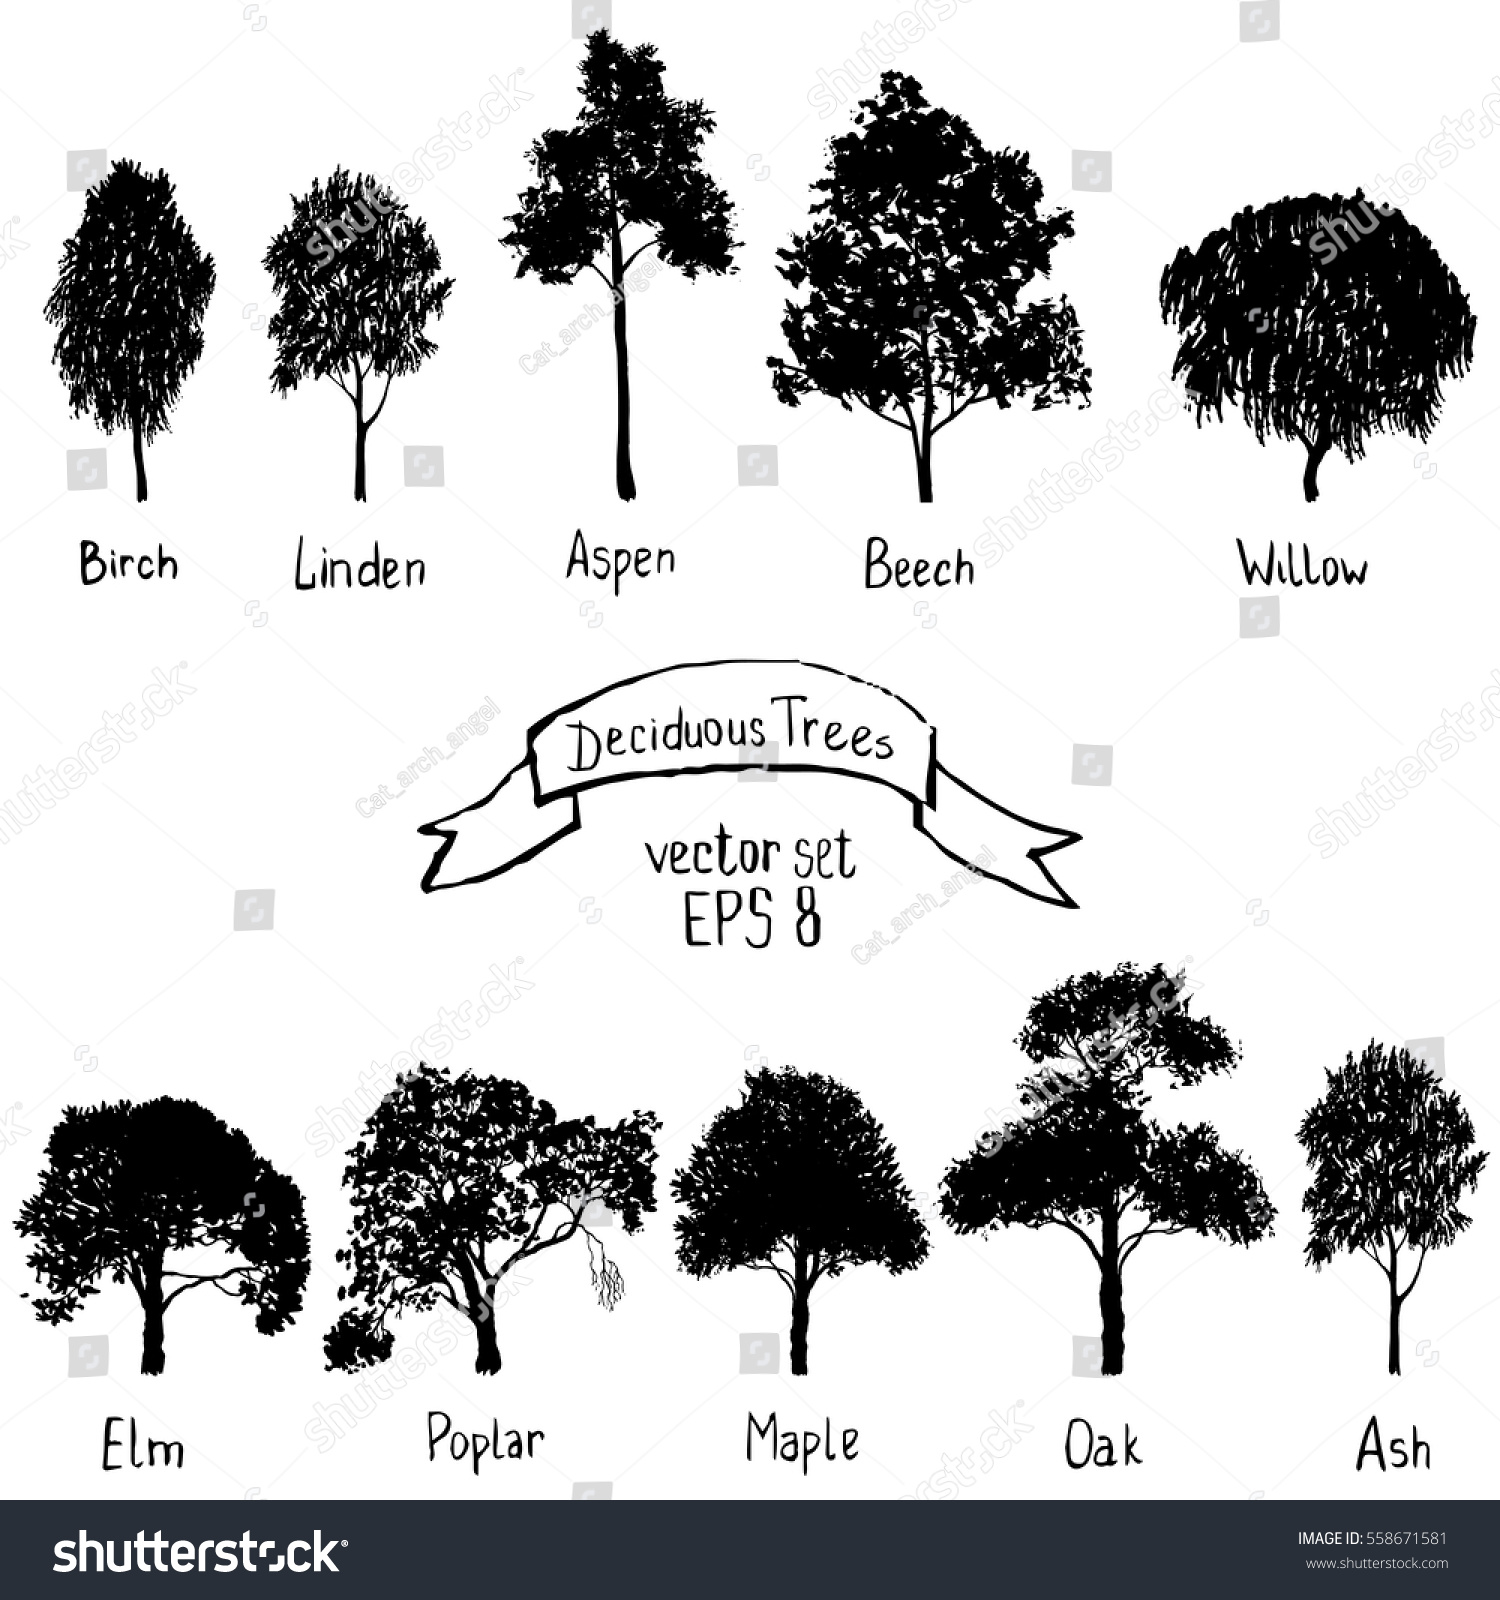 SVG of vector set of deciduous trees, hand drawn isolated natural elements, black silhouettes svg